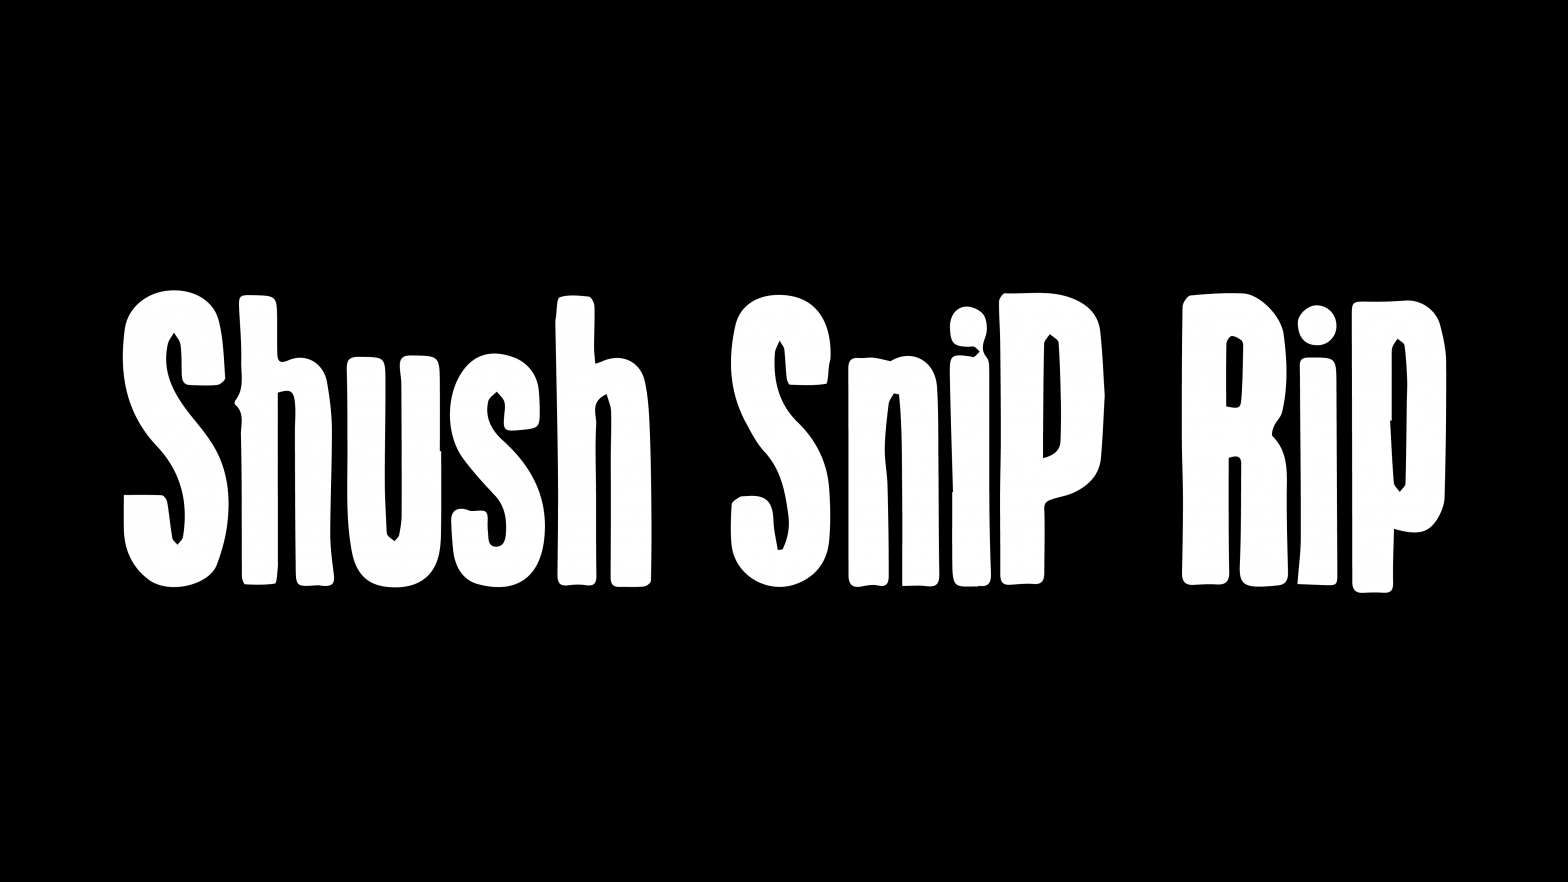 Image of white text on black background, reads 'Shush, Snip, Rip'.